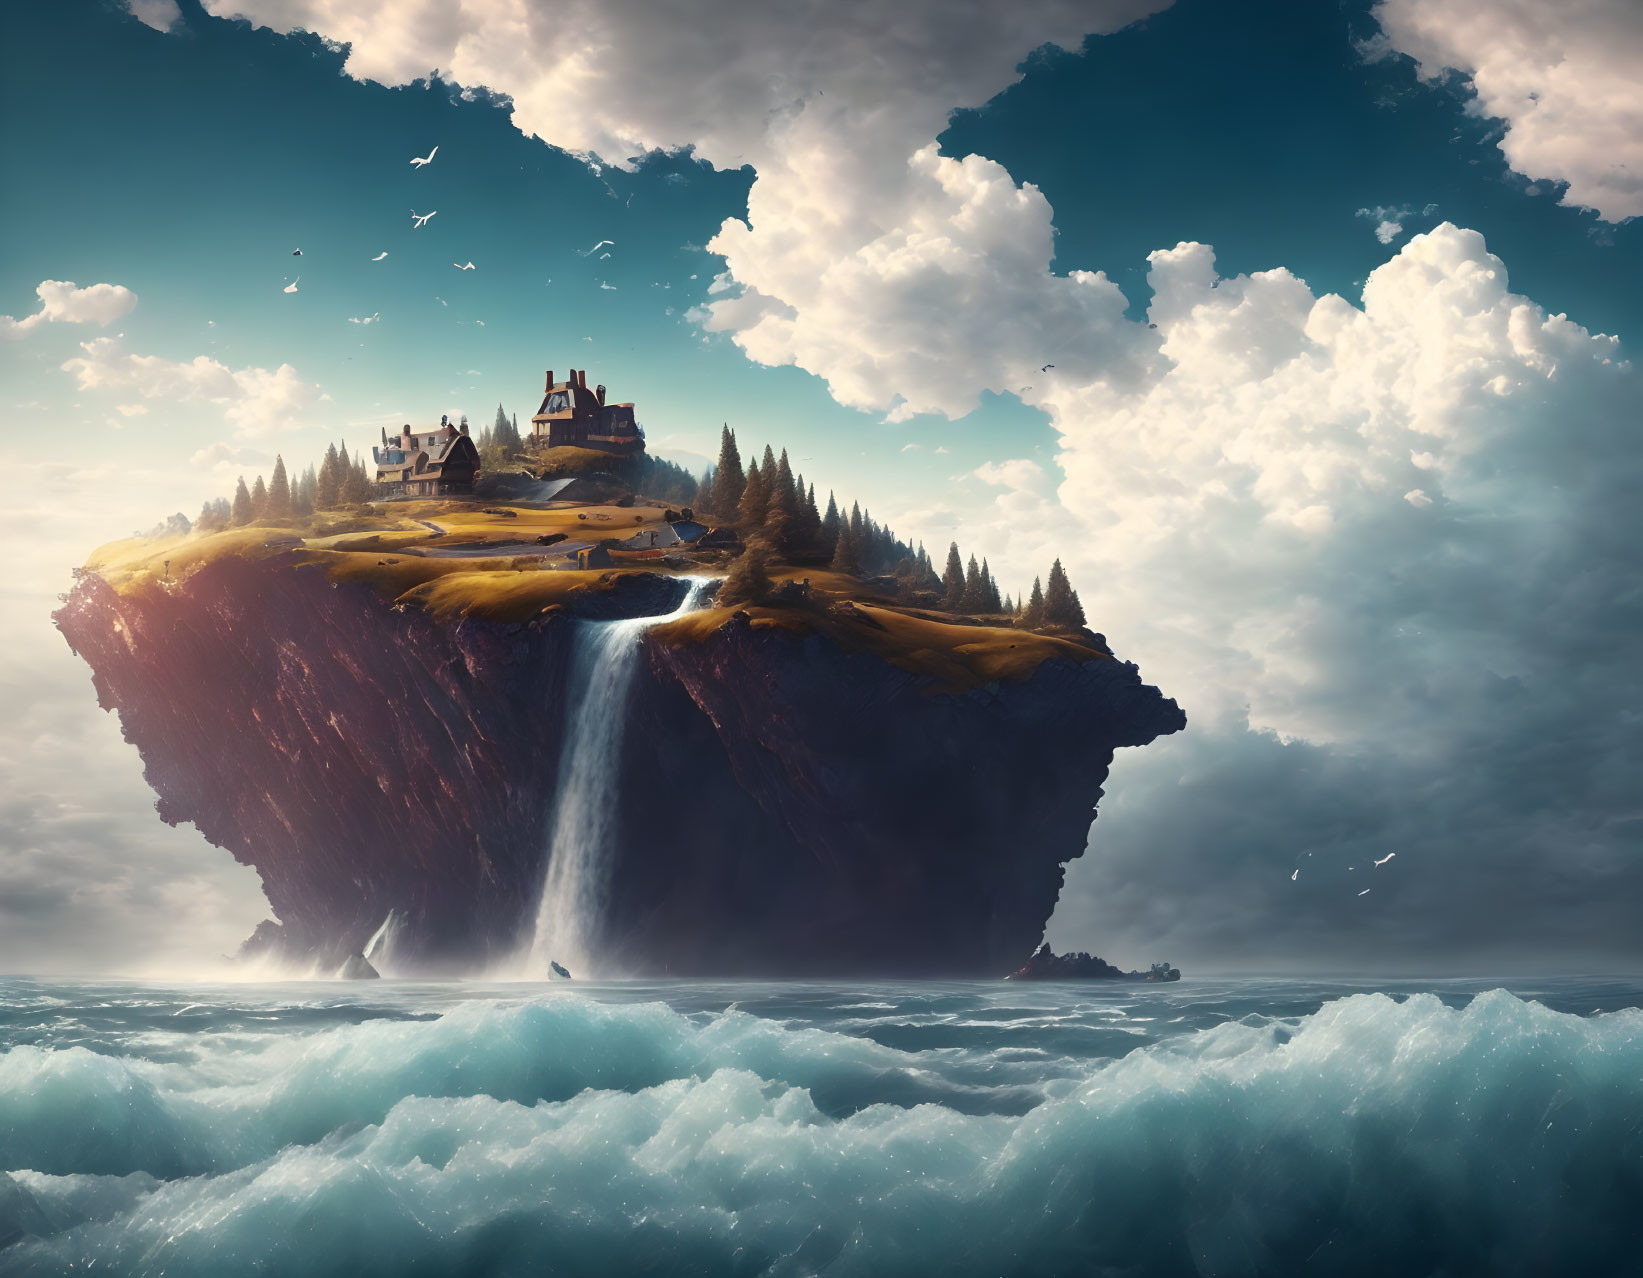 Majestic castle on floating island with waterfall amidst stormy ocean waves